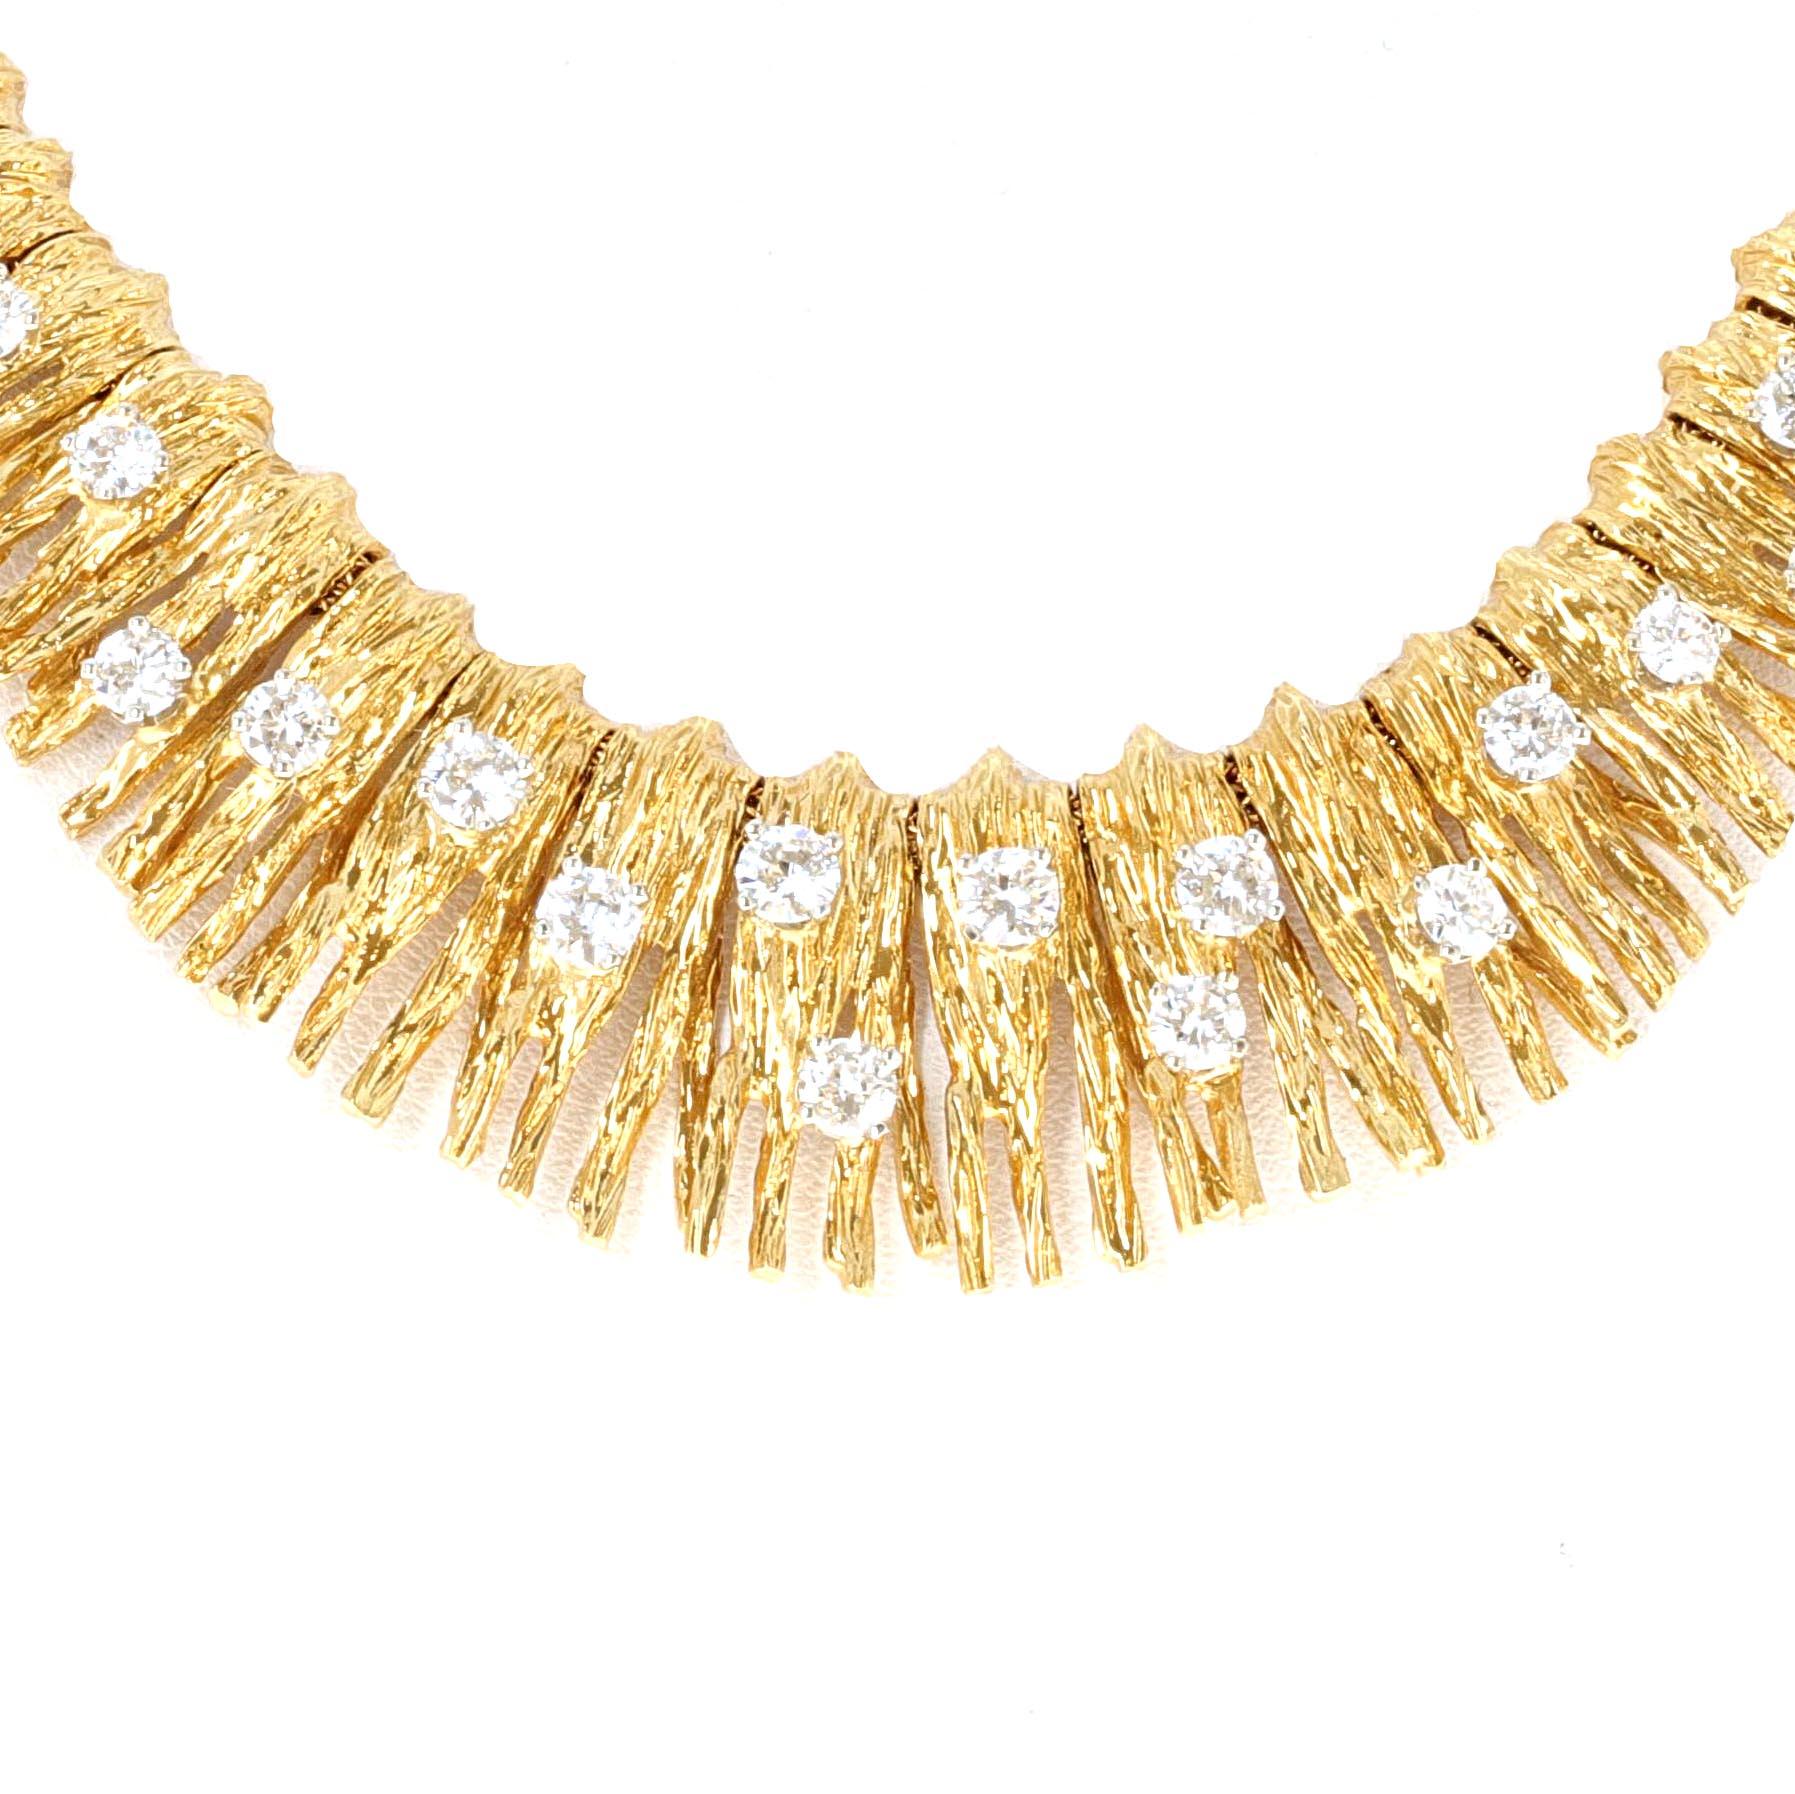 Retro, 18 karat yellow gold bark and diamond necklace. The necklace is made with beautiful detail and has an estimated 2.25 carats total weight in white, eye clean, round brilliant diamonds.
